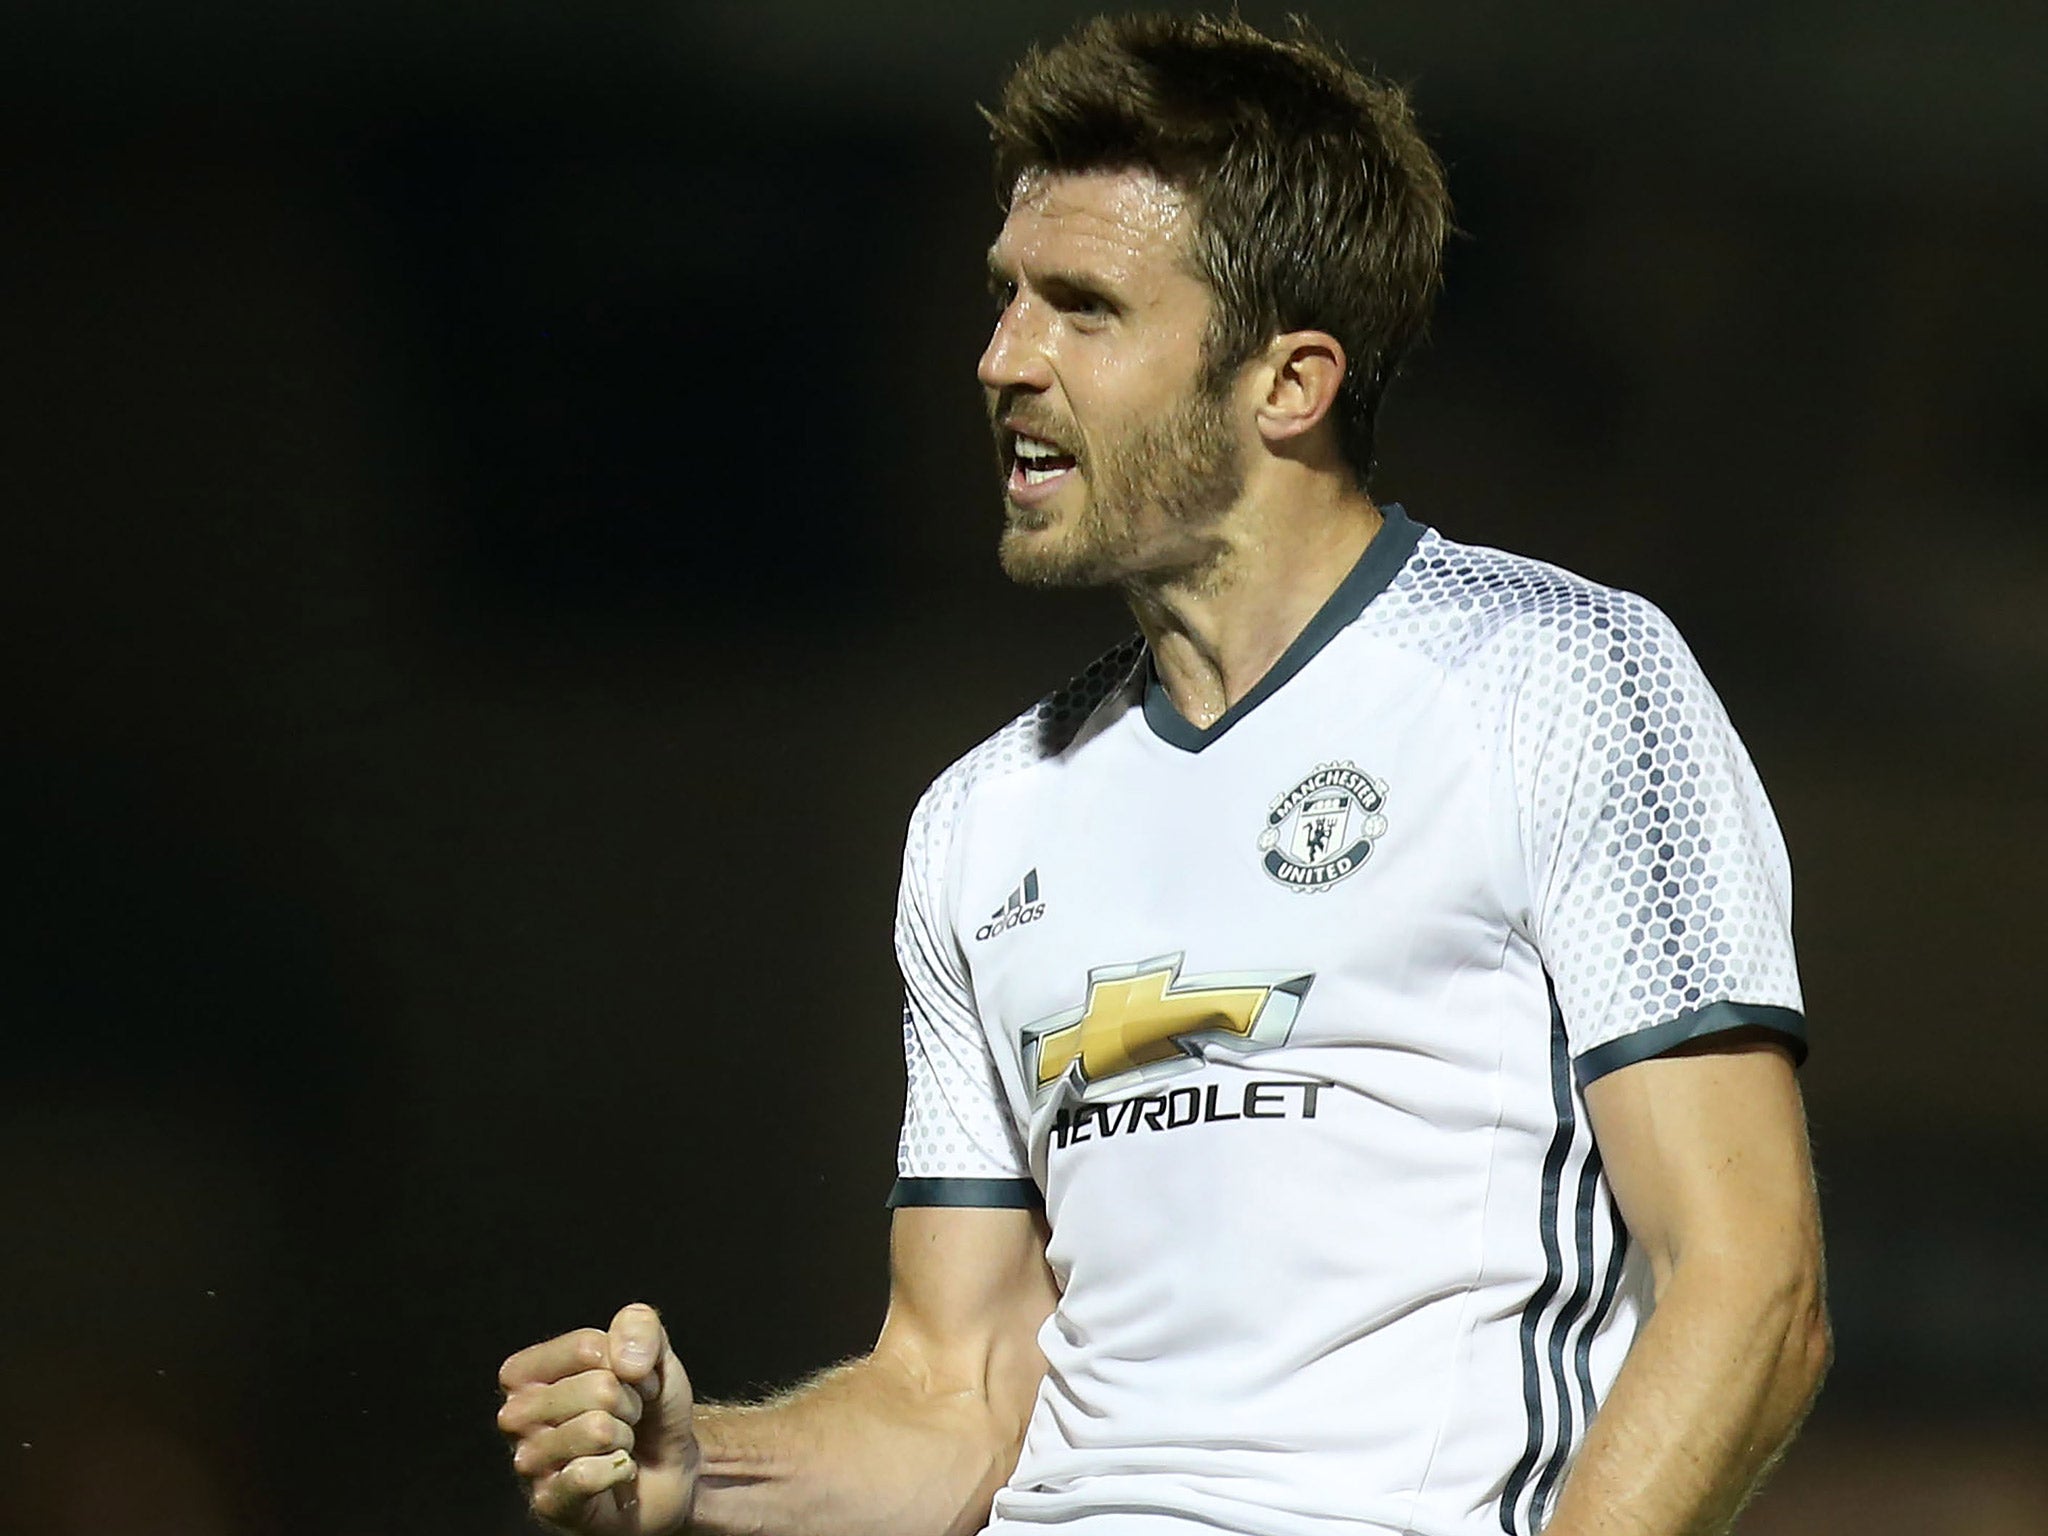 Michael Carrick scored the opener in Manchester United's 3-1 win over Northampton Town